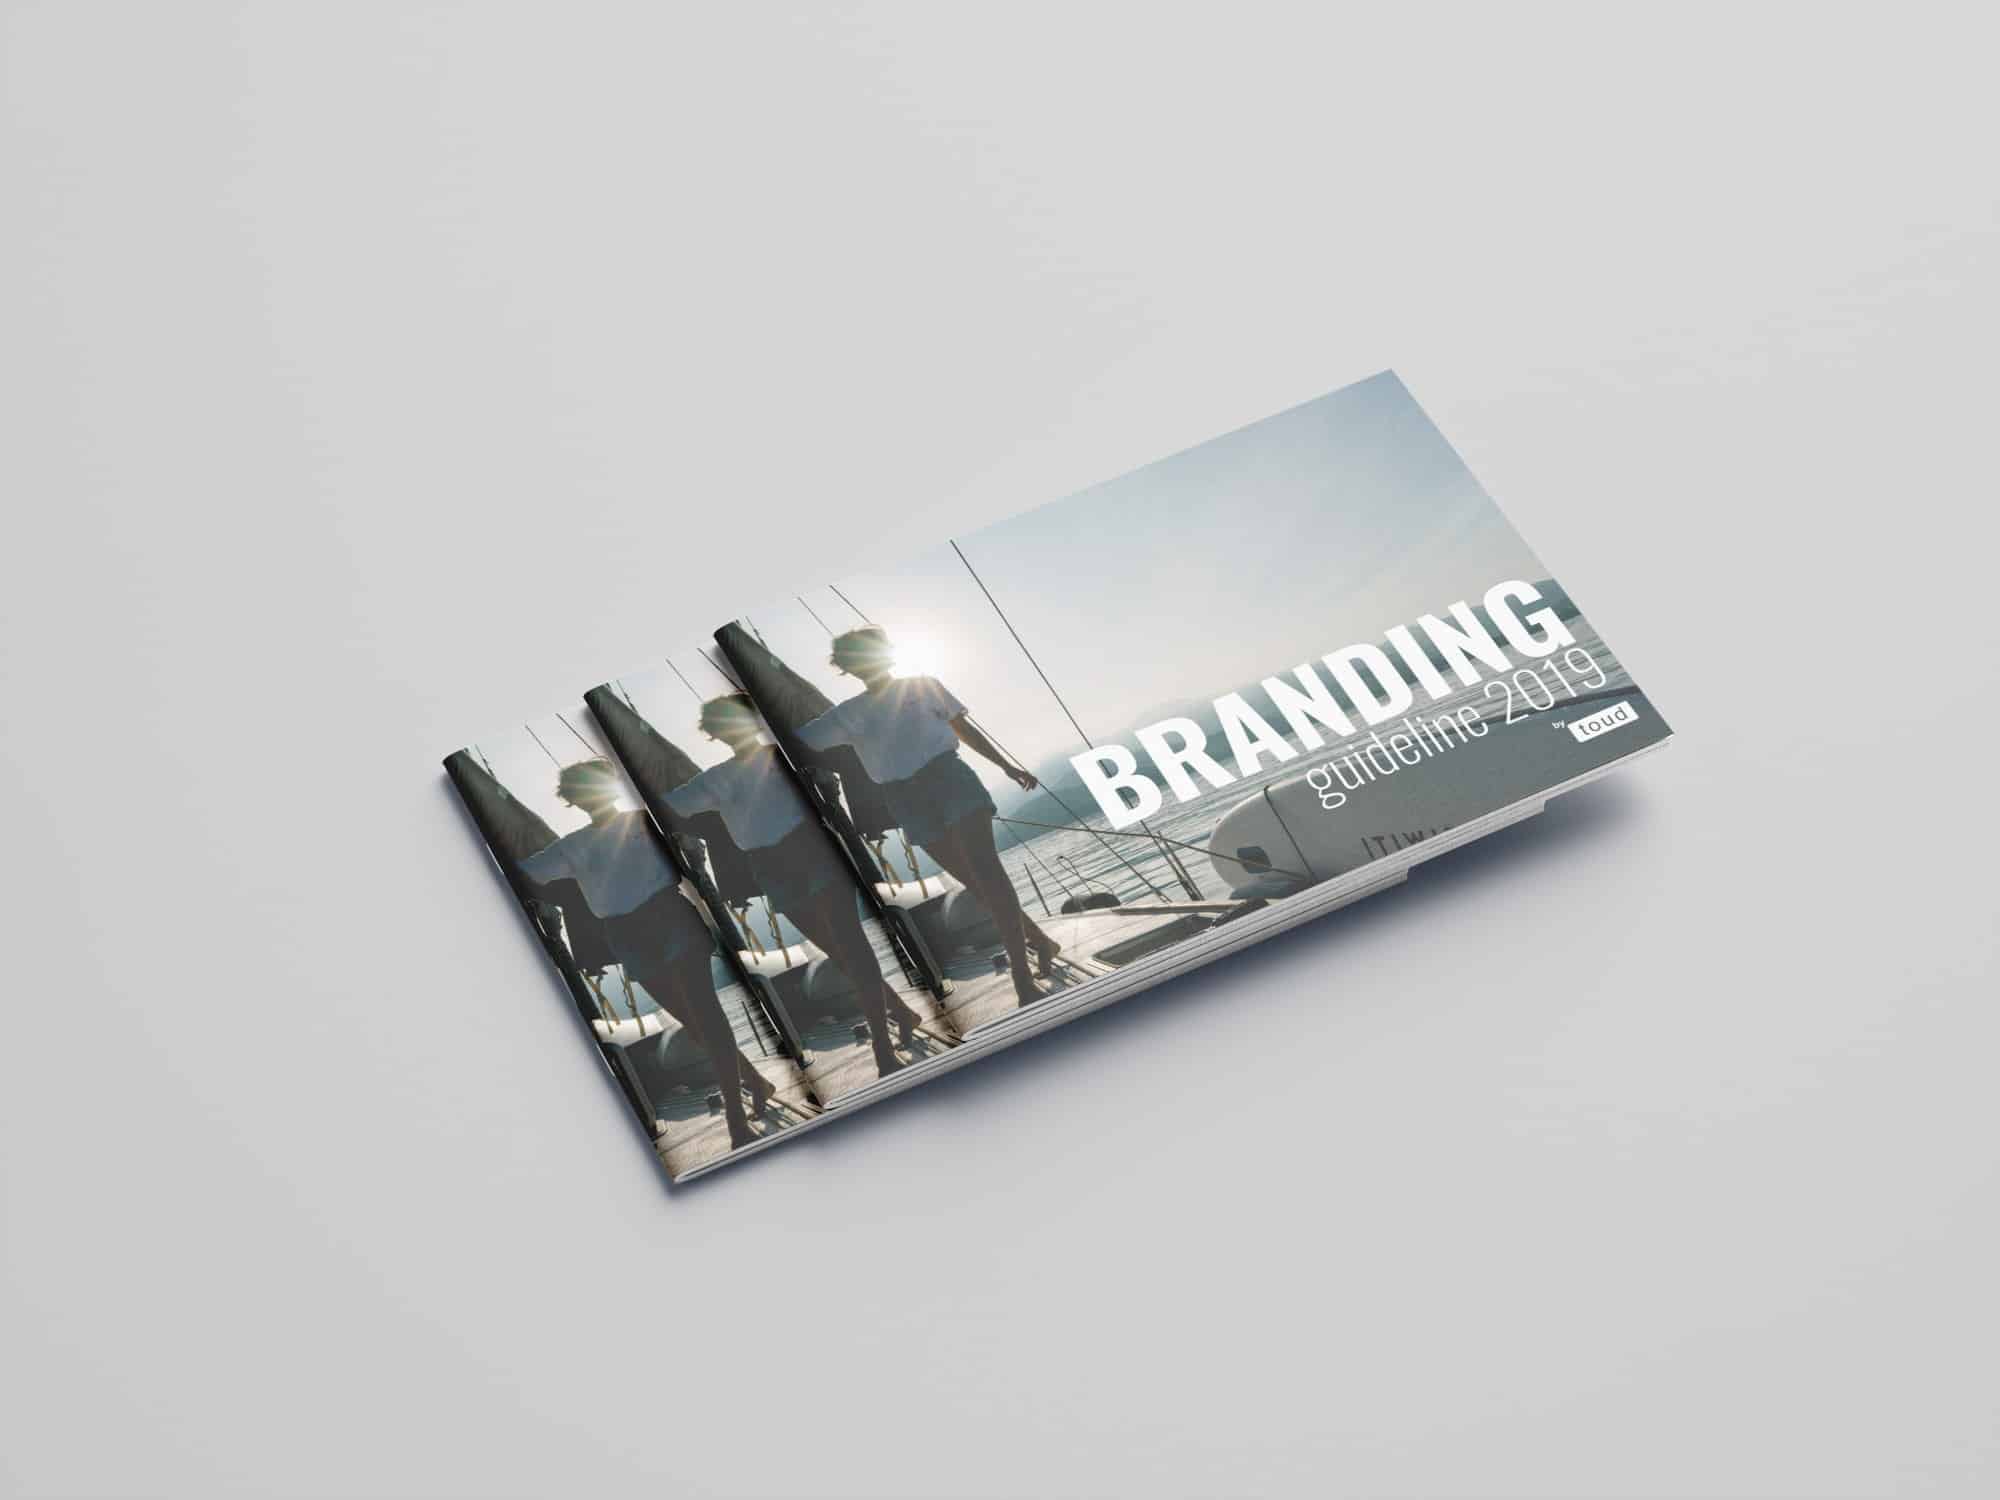 Branding guideline by Toud, publishing design